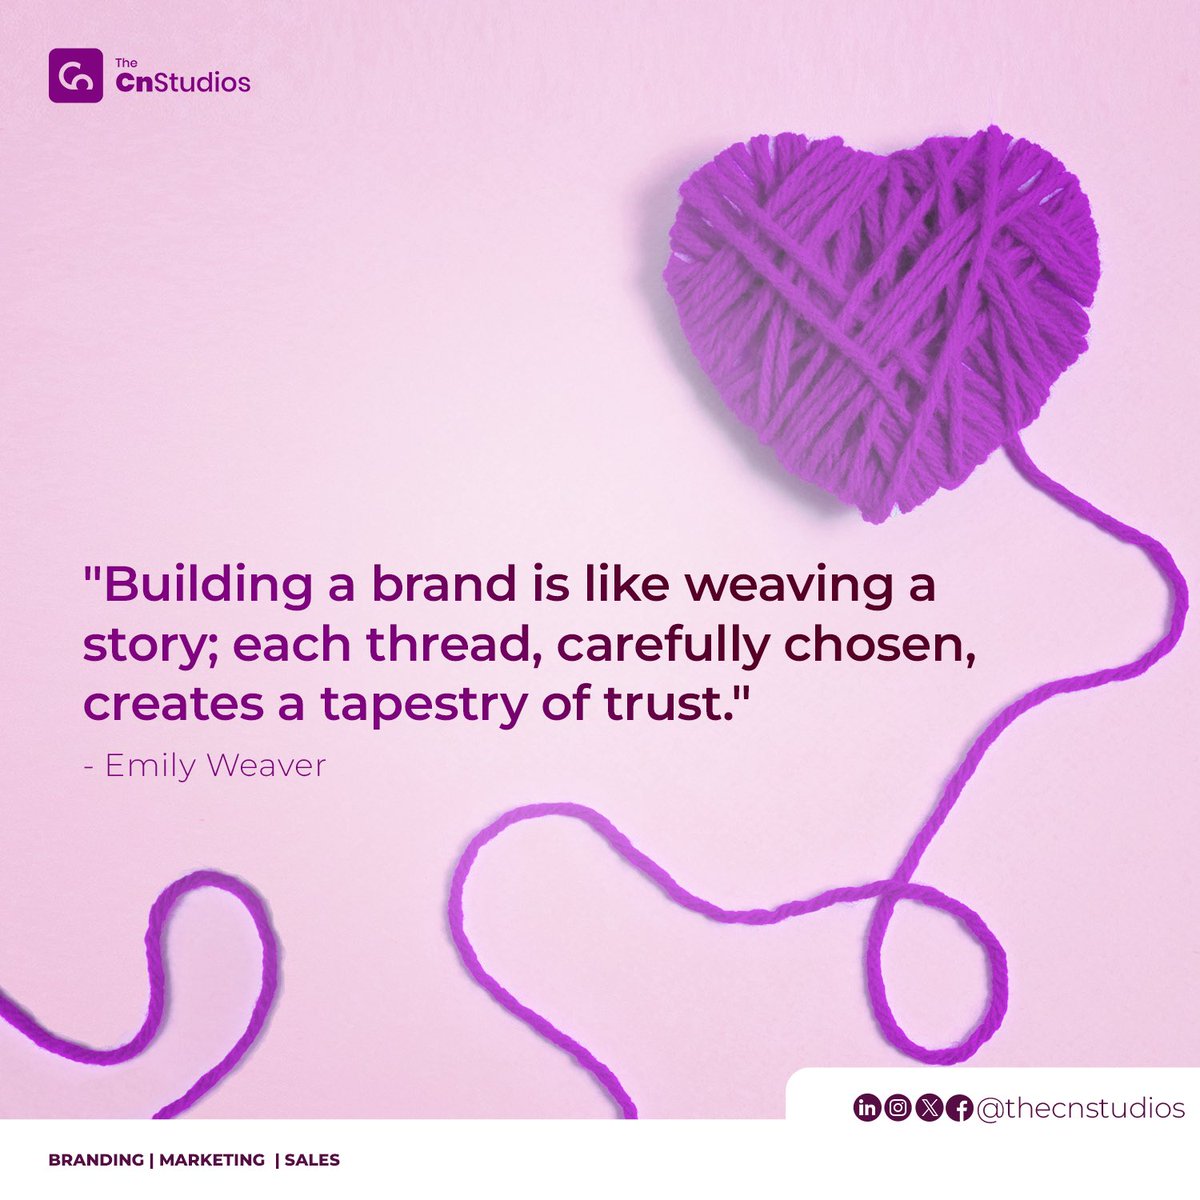 Branding and cnstudios are besties, work with us, lets build your brand for  you
#cnstudios #thecnstudios #branding #logo #buildingbrands #trust #socialmedia #themediapeople